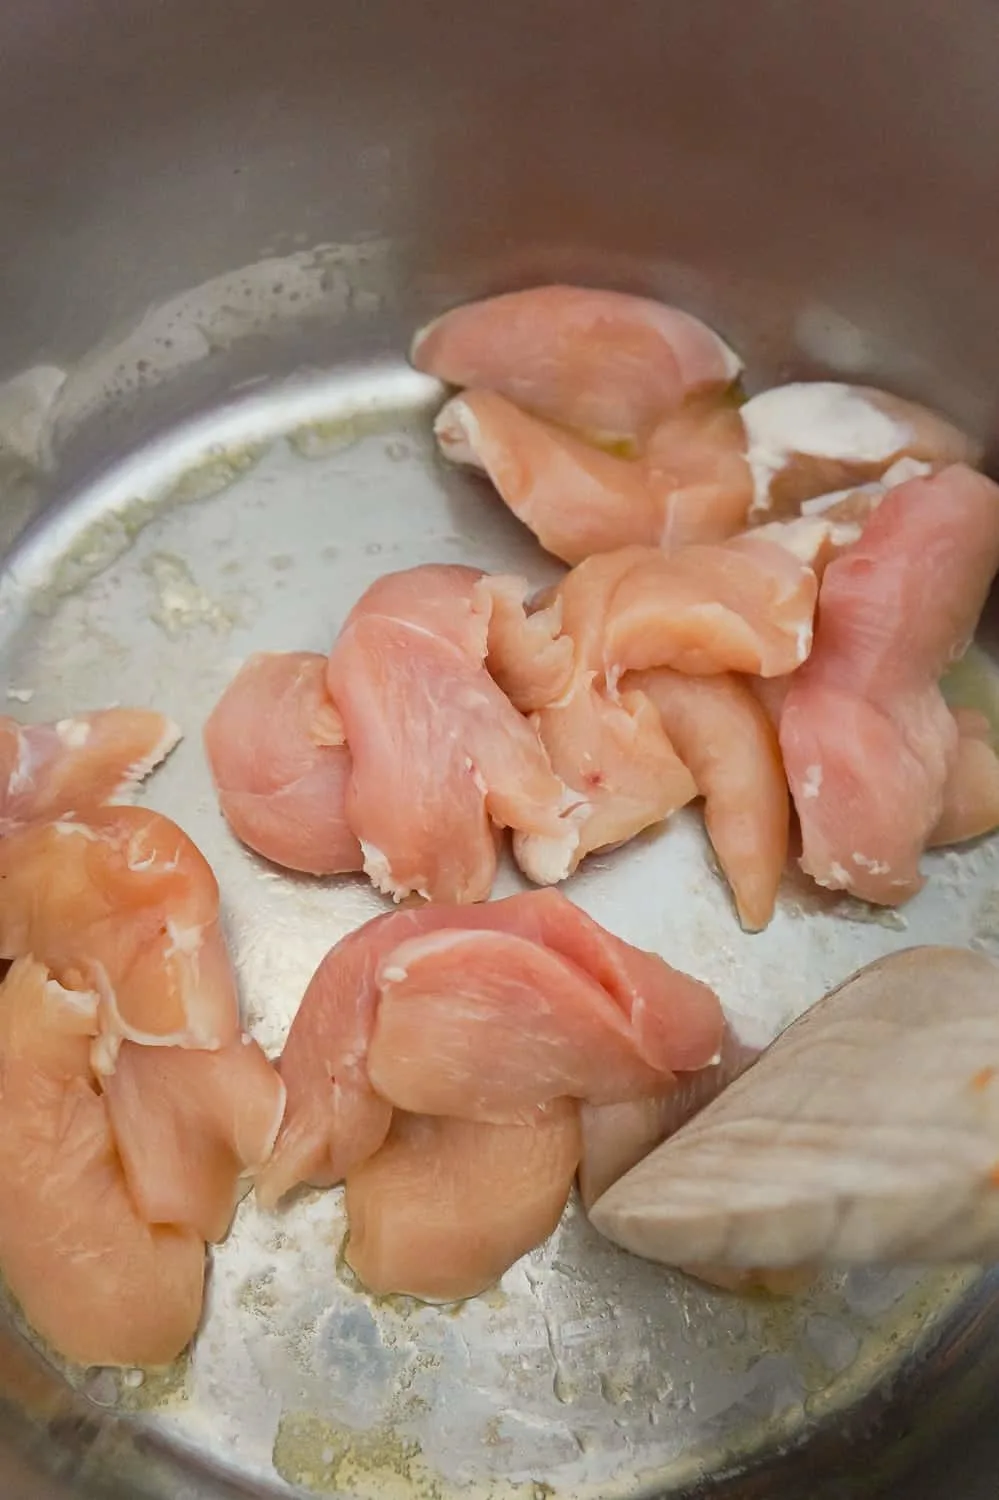 Raw chicken breast strips cooking in an Instant Pot